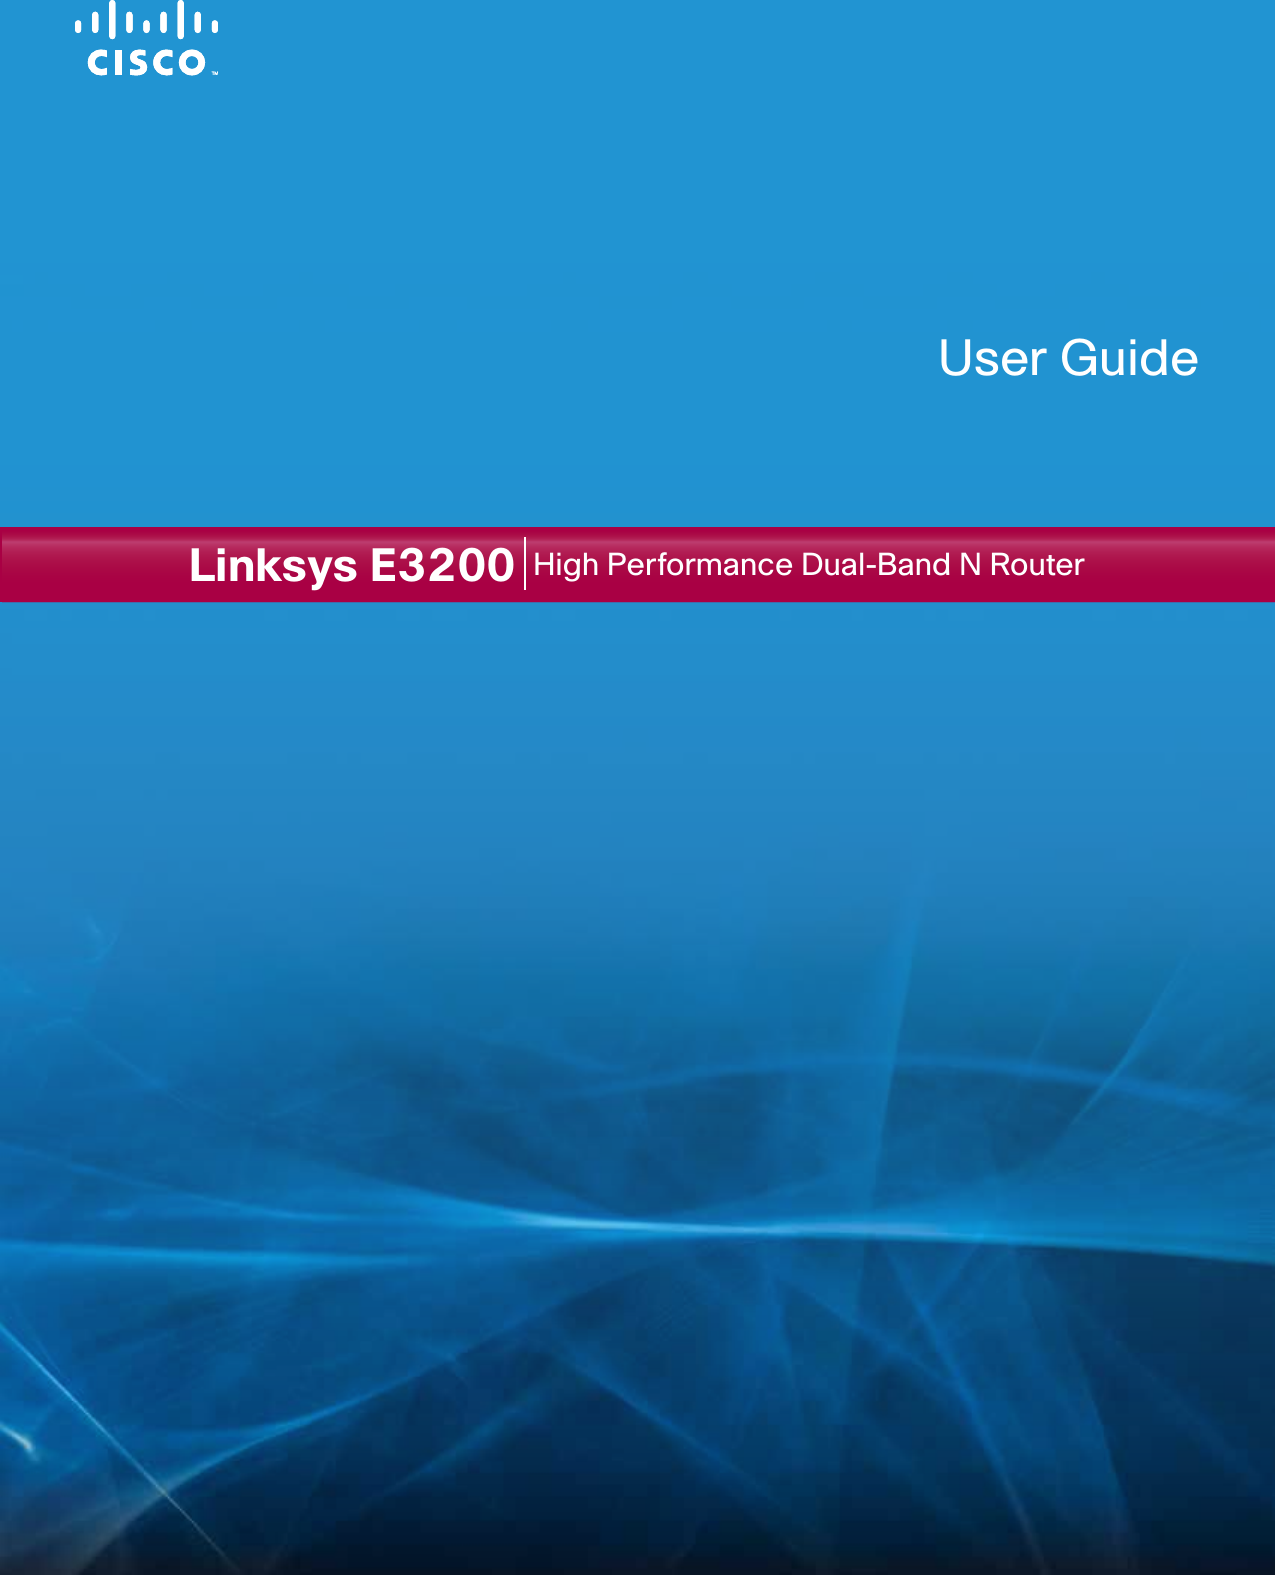 Linksys E3200 High Performance Dual-Band N RouterUser Guide